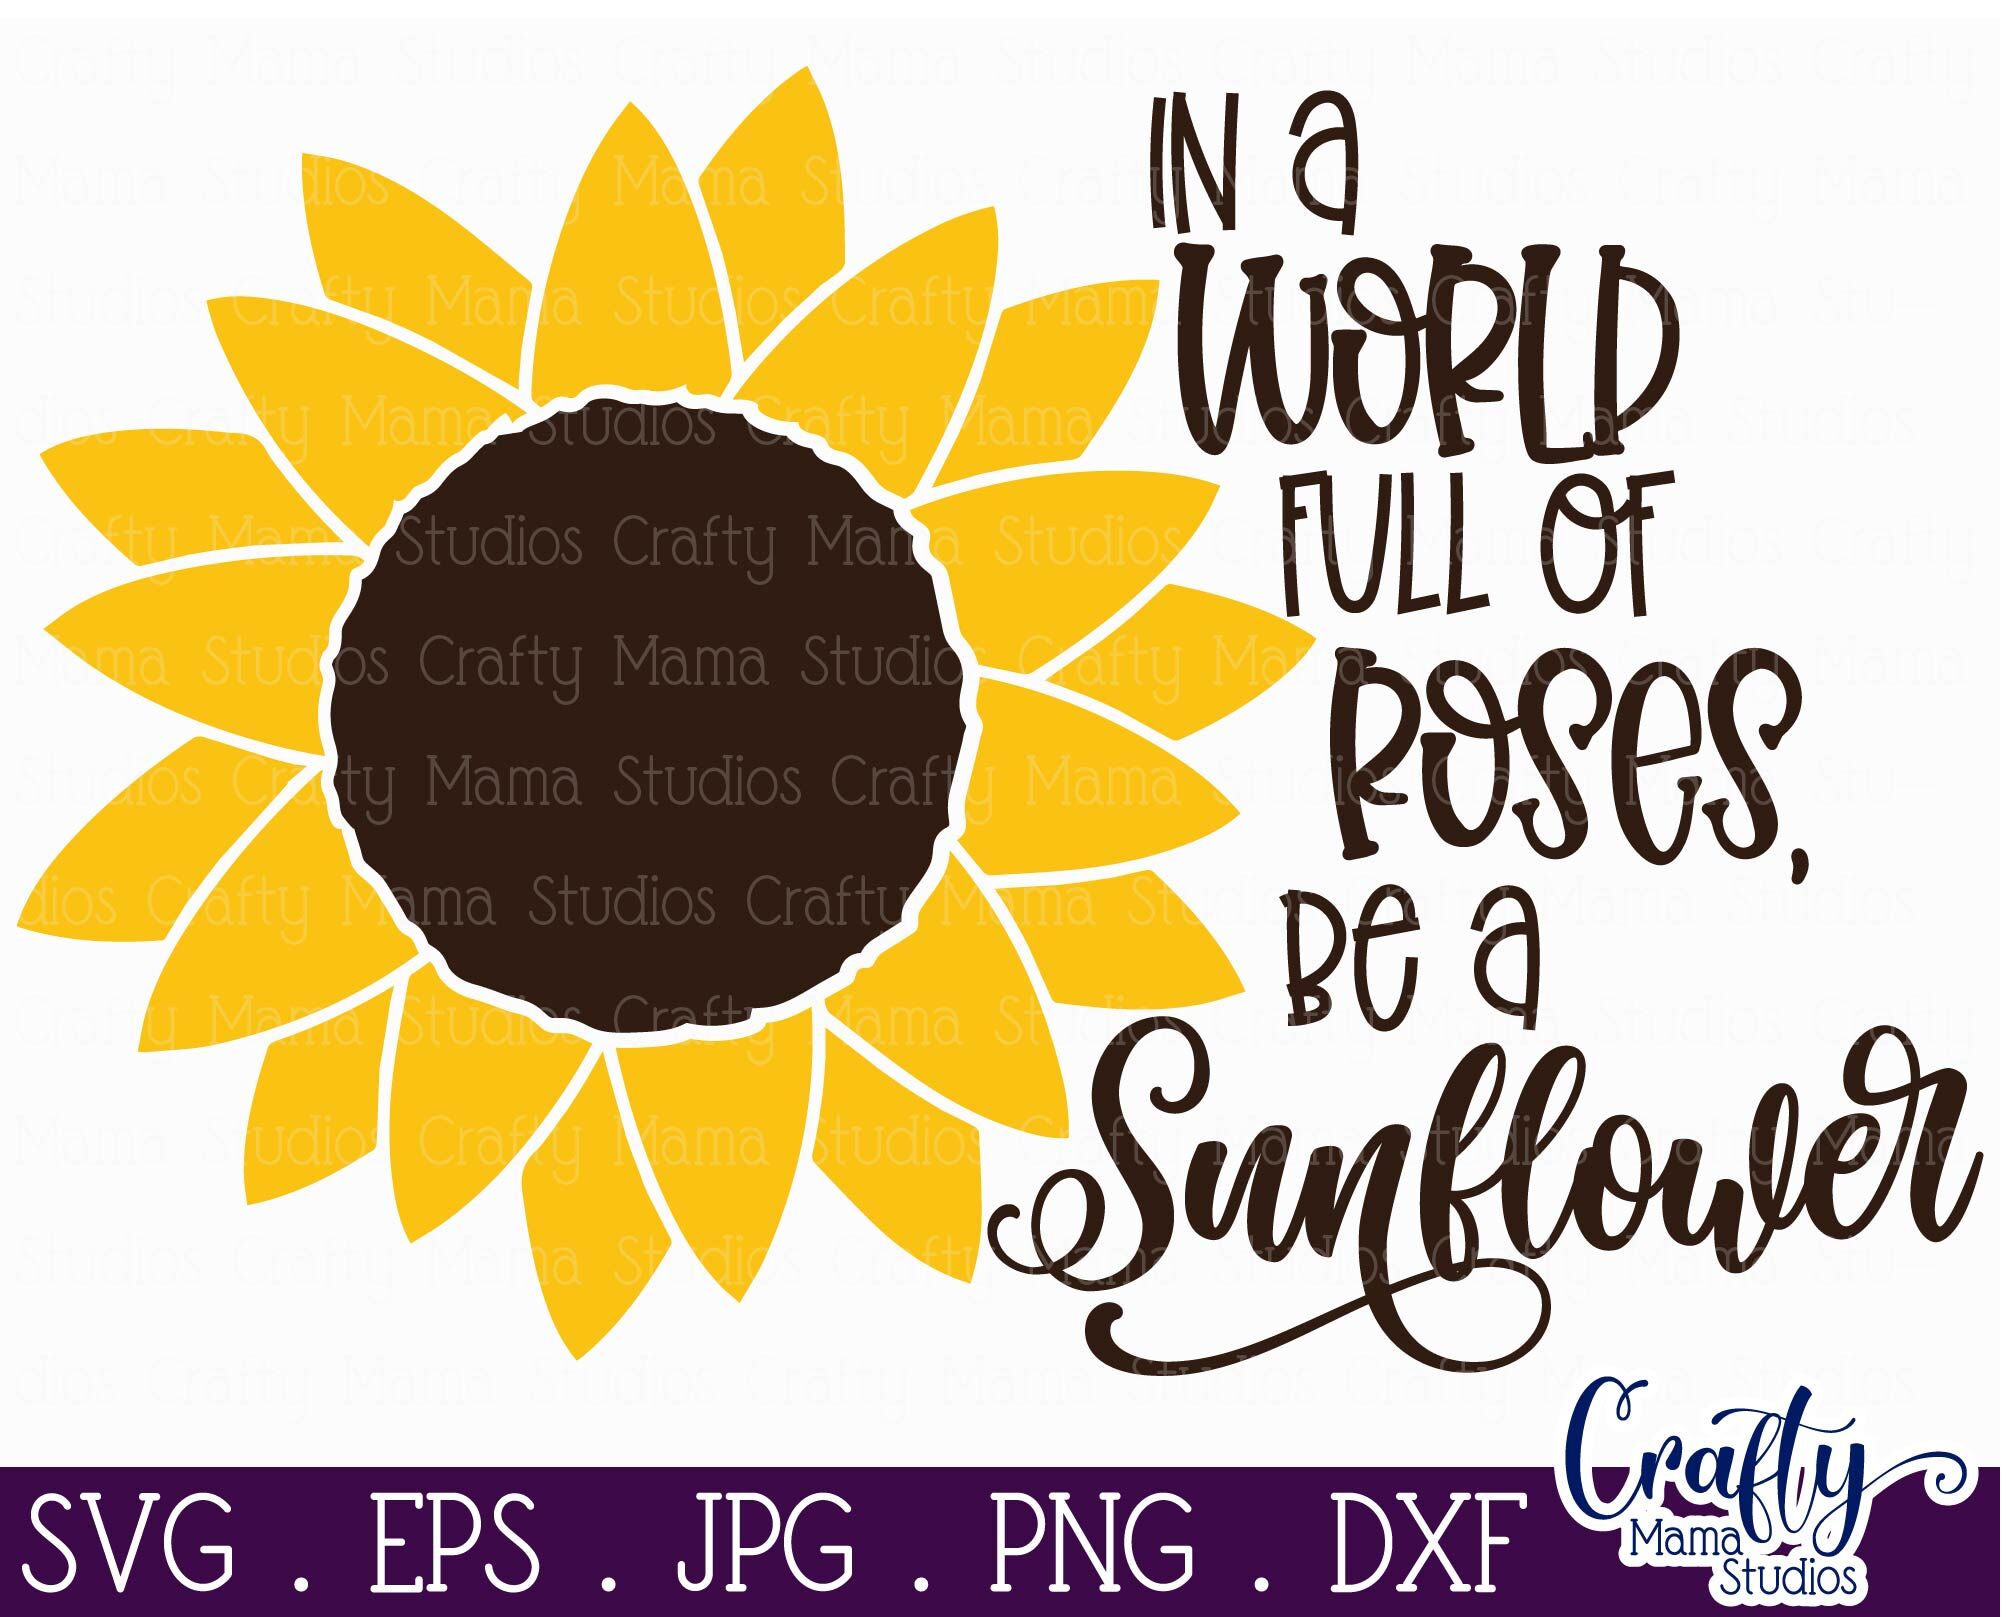 Download Sunflower Svg Sunflower Quote In A World Full Of Roses By Crafty Mama Studios Thehungryjpeg Com